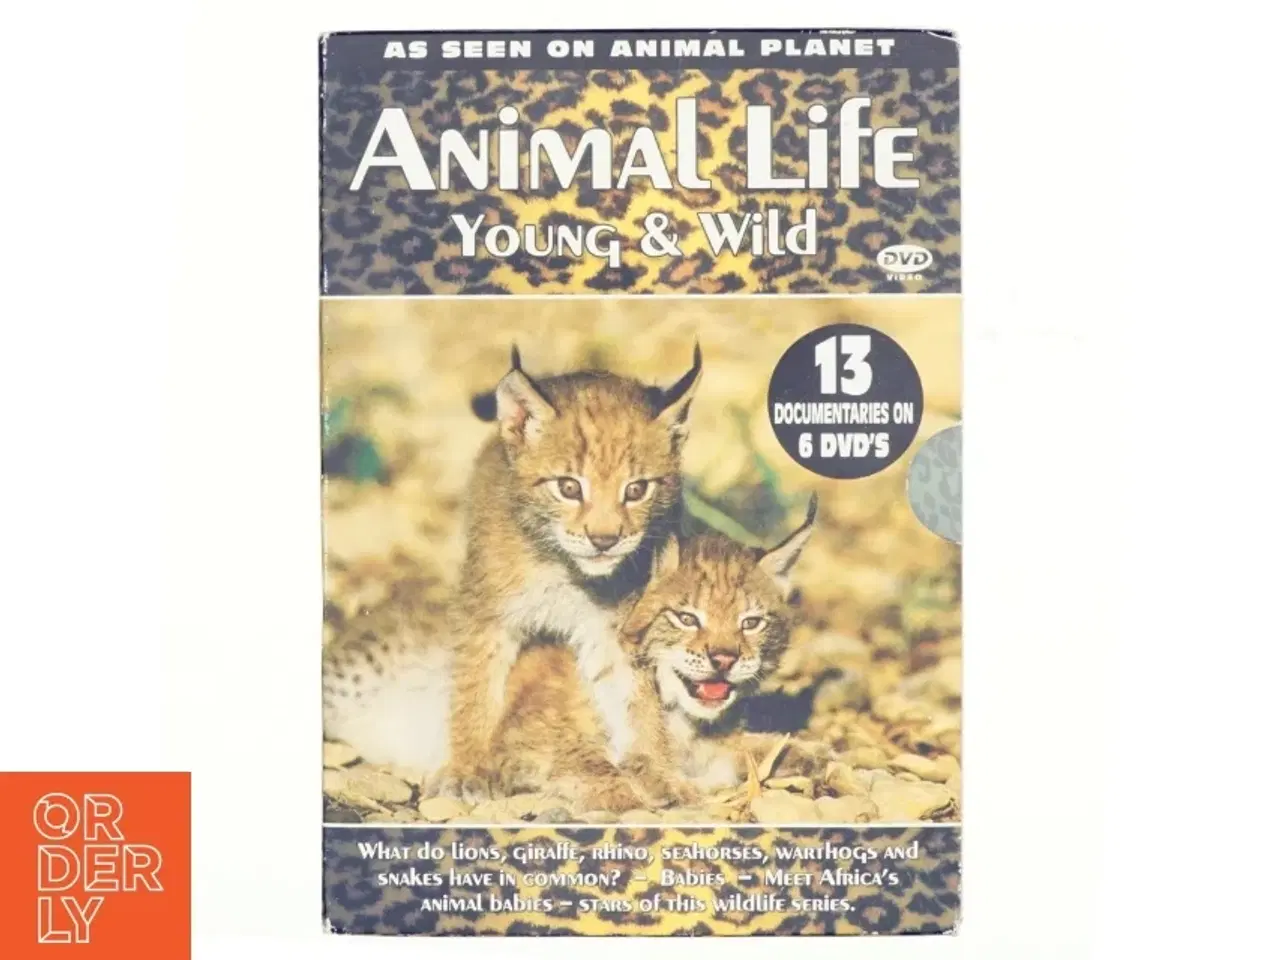 Billede 1 - Animal life, young and wild DVD